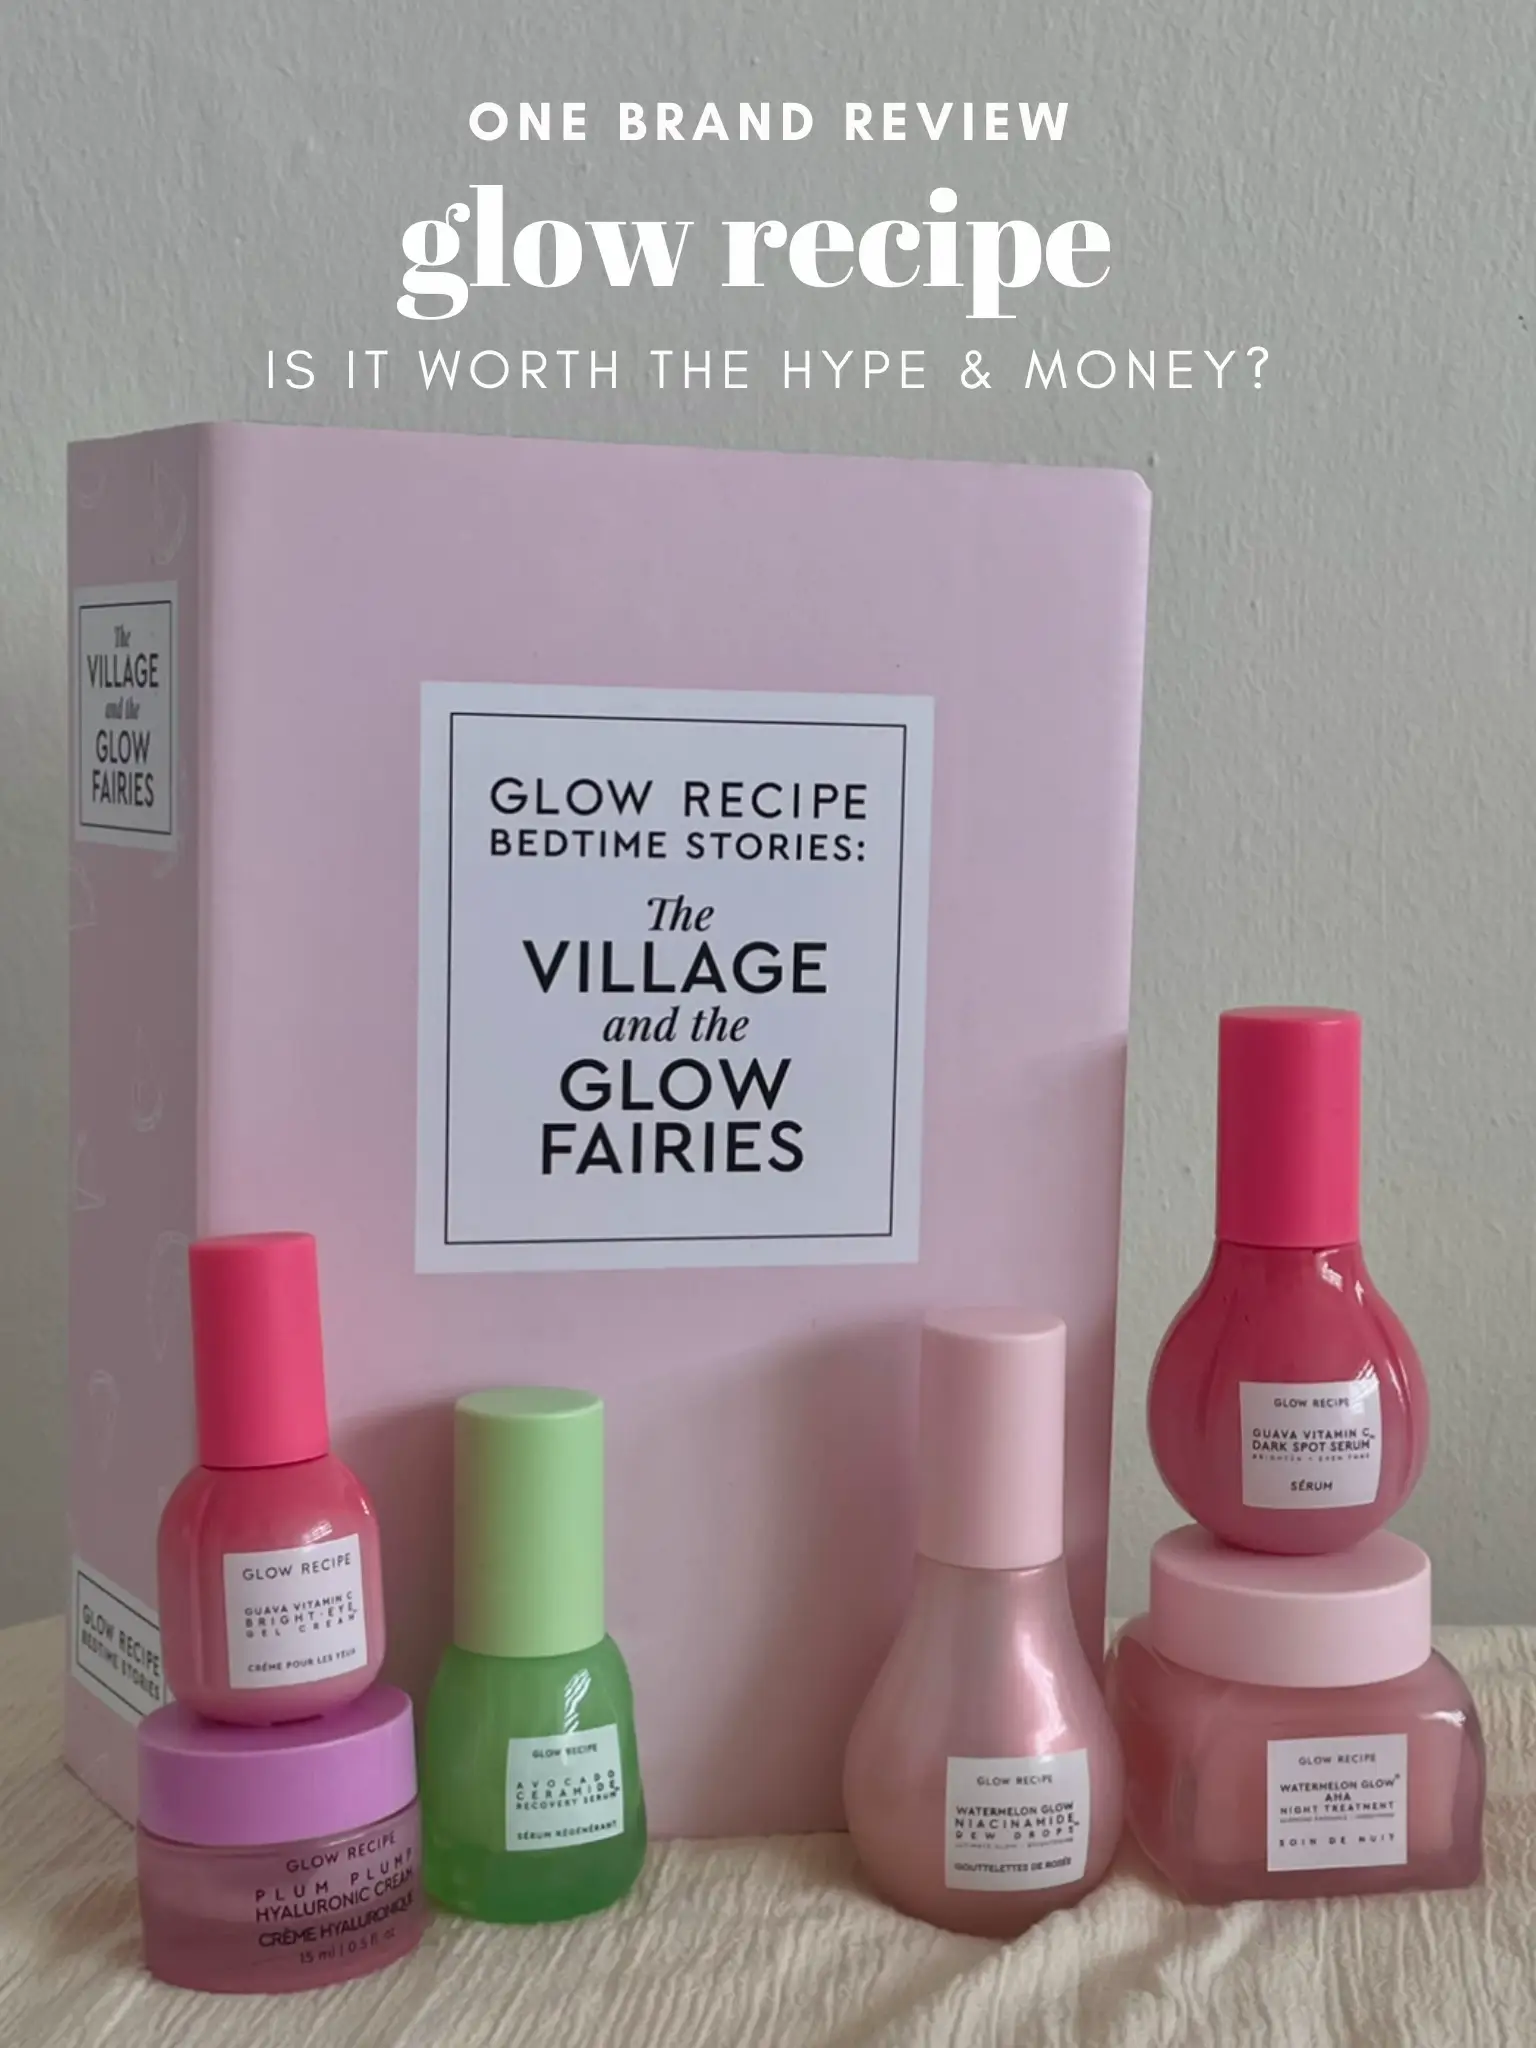 does GLOW RECIPE truly live up to its hype? 's images(0)